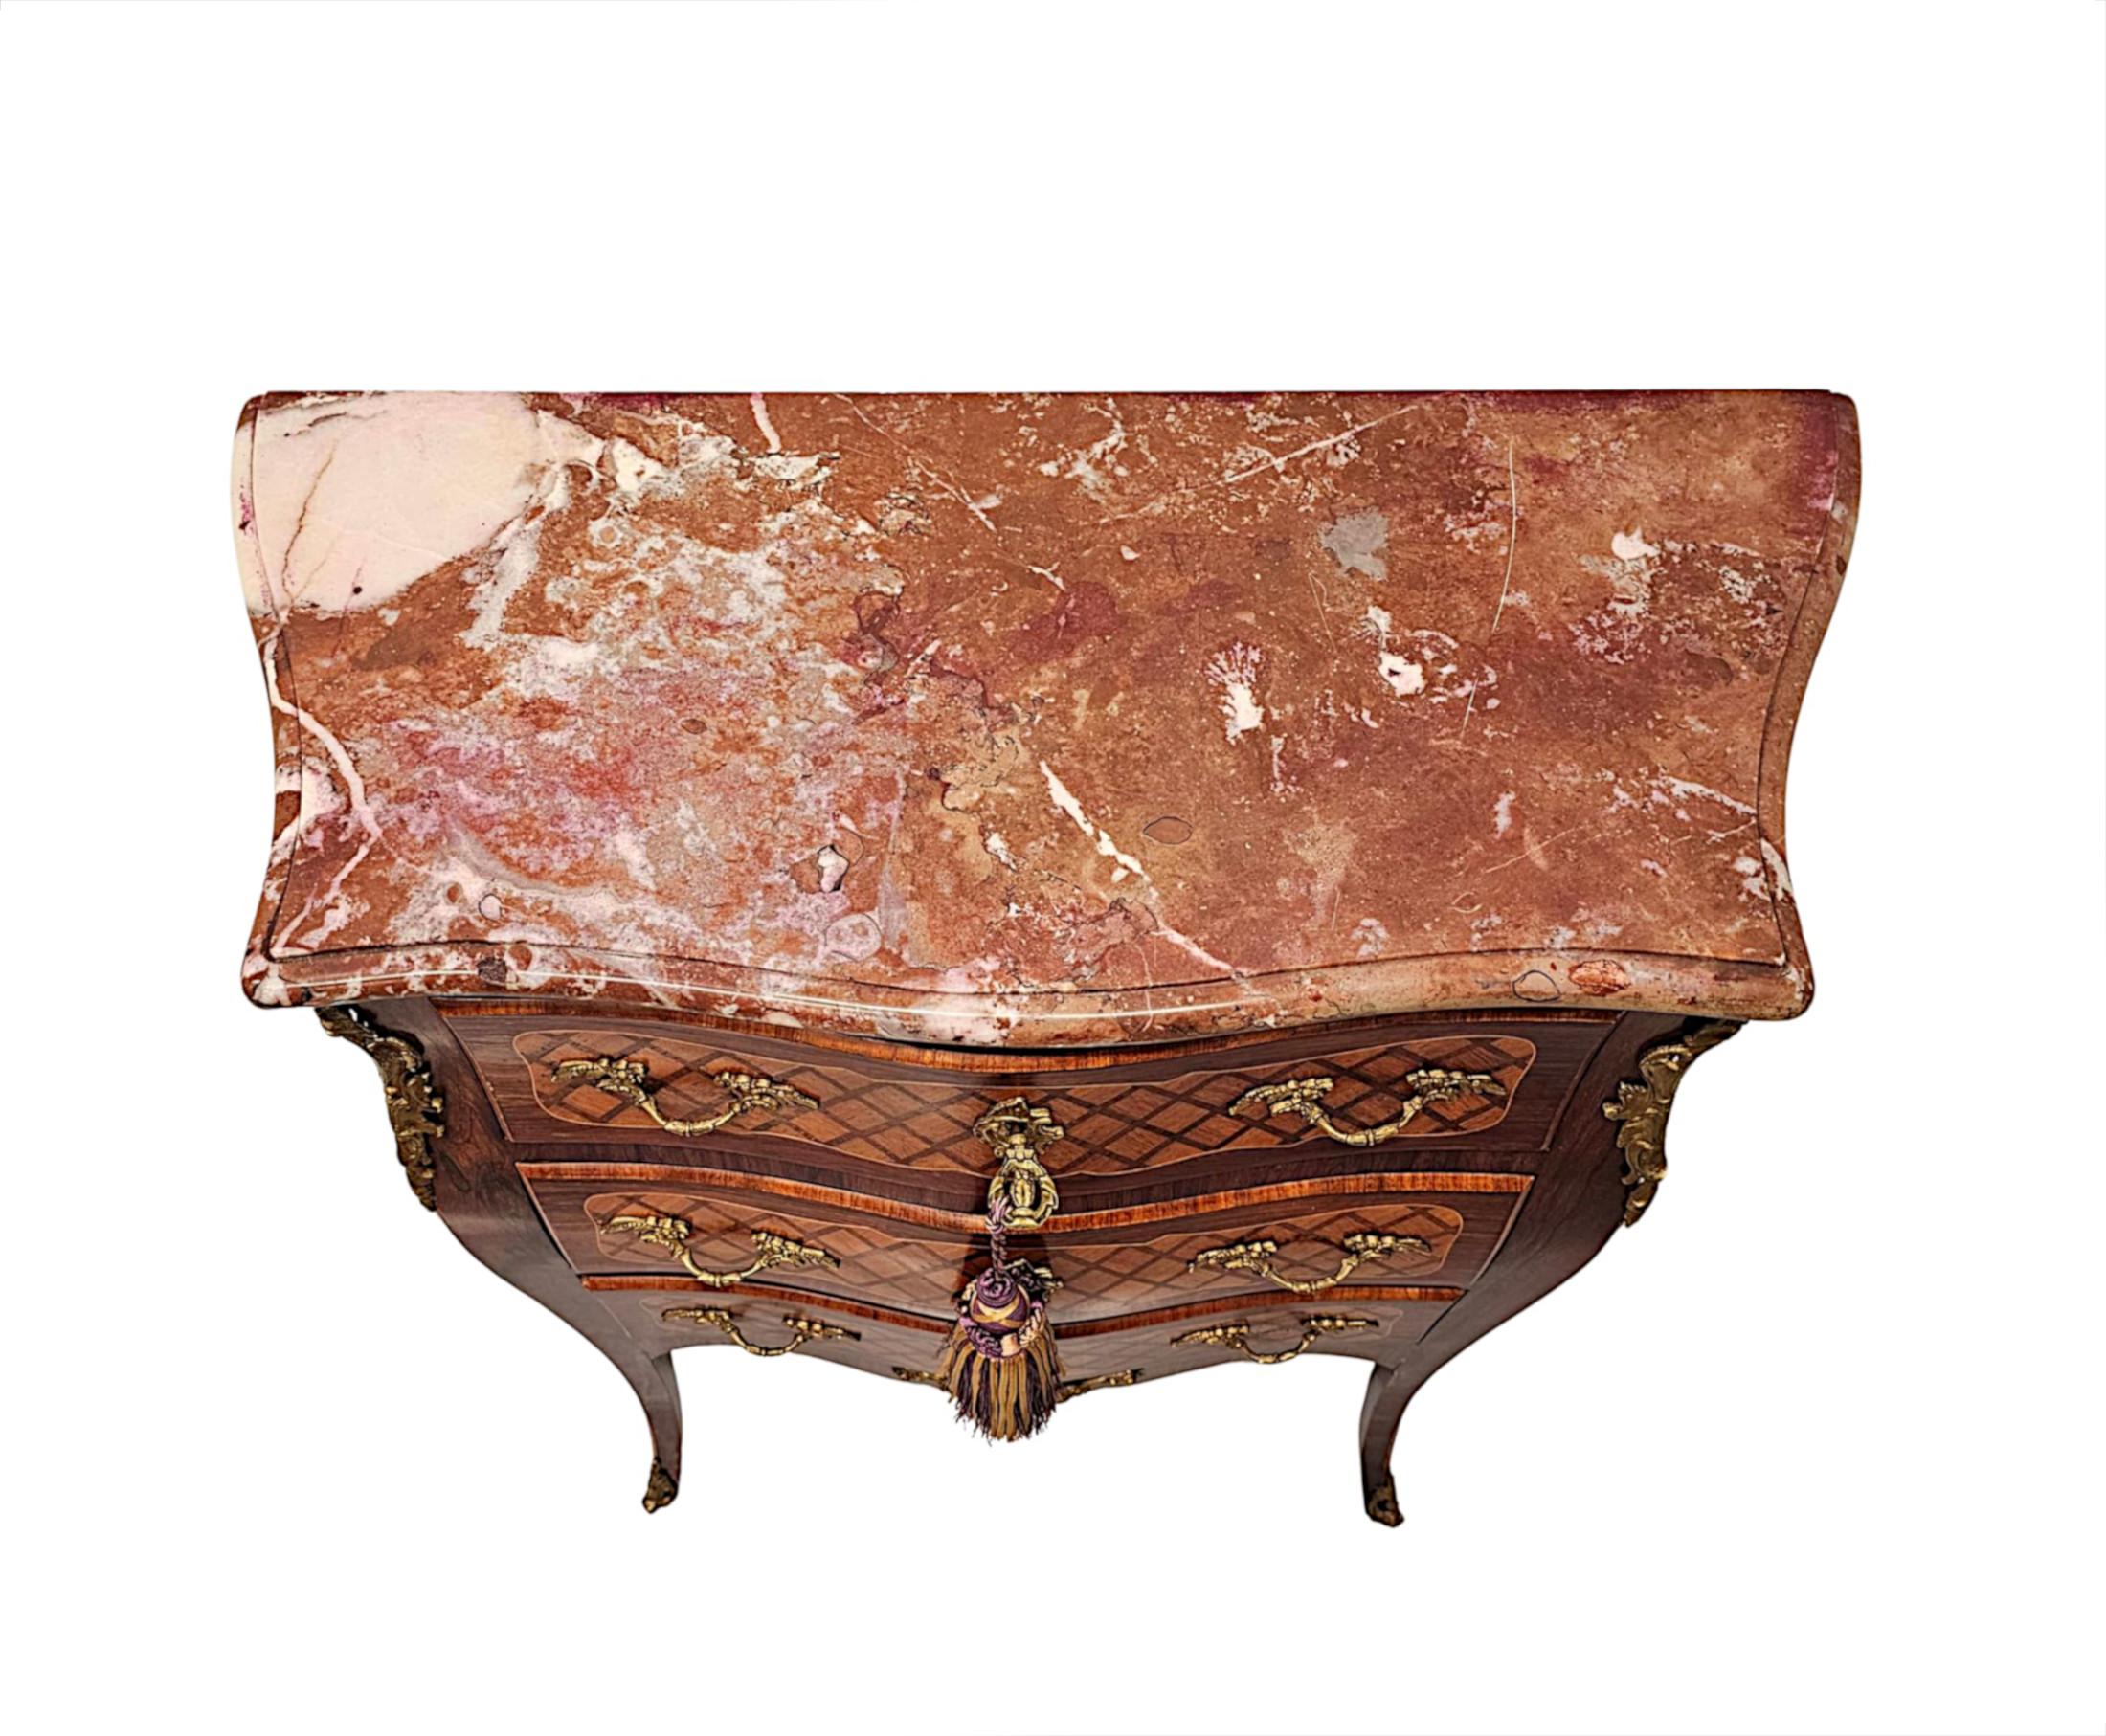 A Very Rare 19th Century Marble Top Inlaid Ormolu Mounted Chest of Drawers For Sale 2